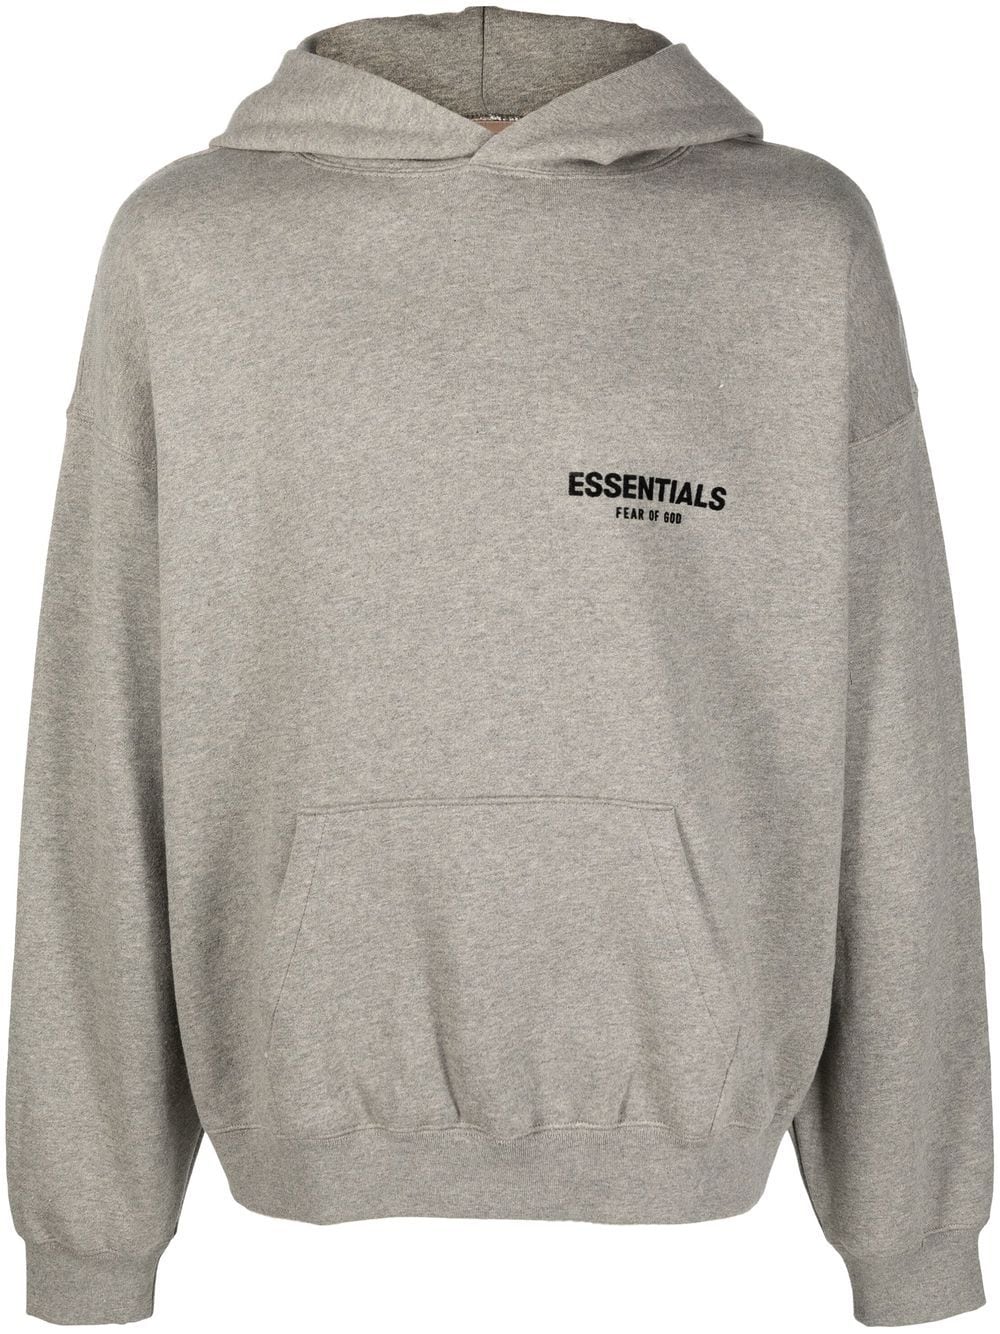 FEAR OF GOD ESSENTIALS logo pullover hoodie - Grey von FEAR OF GOD ESSENTIALS